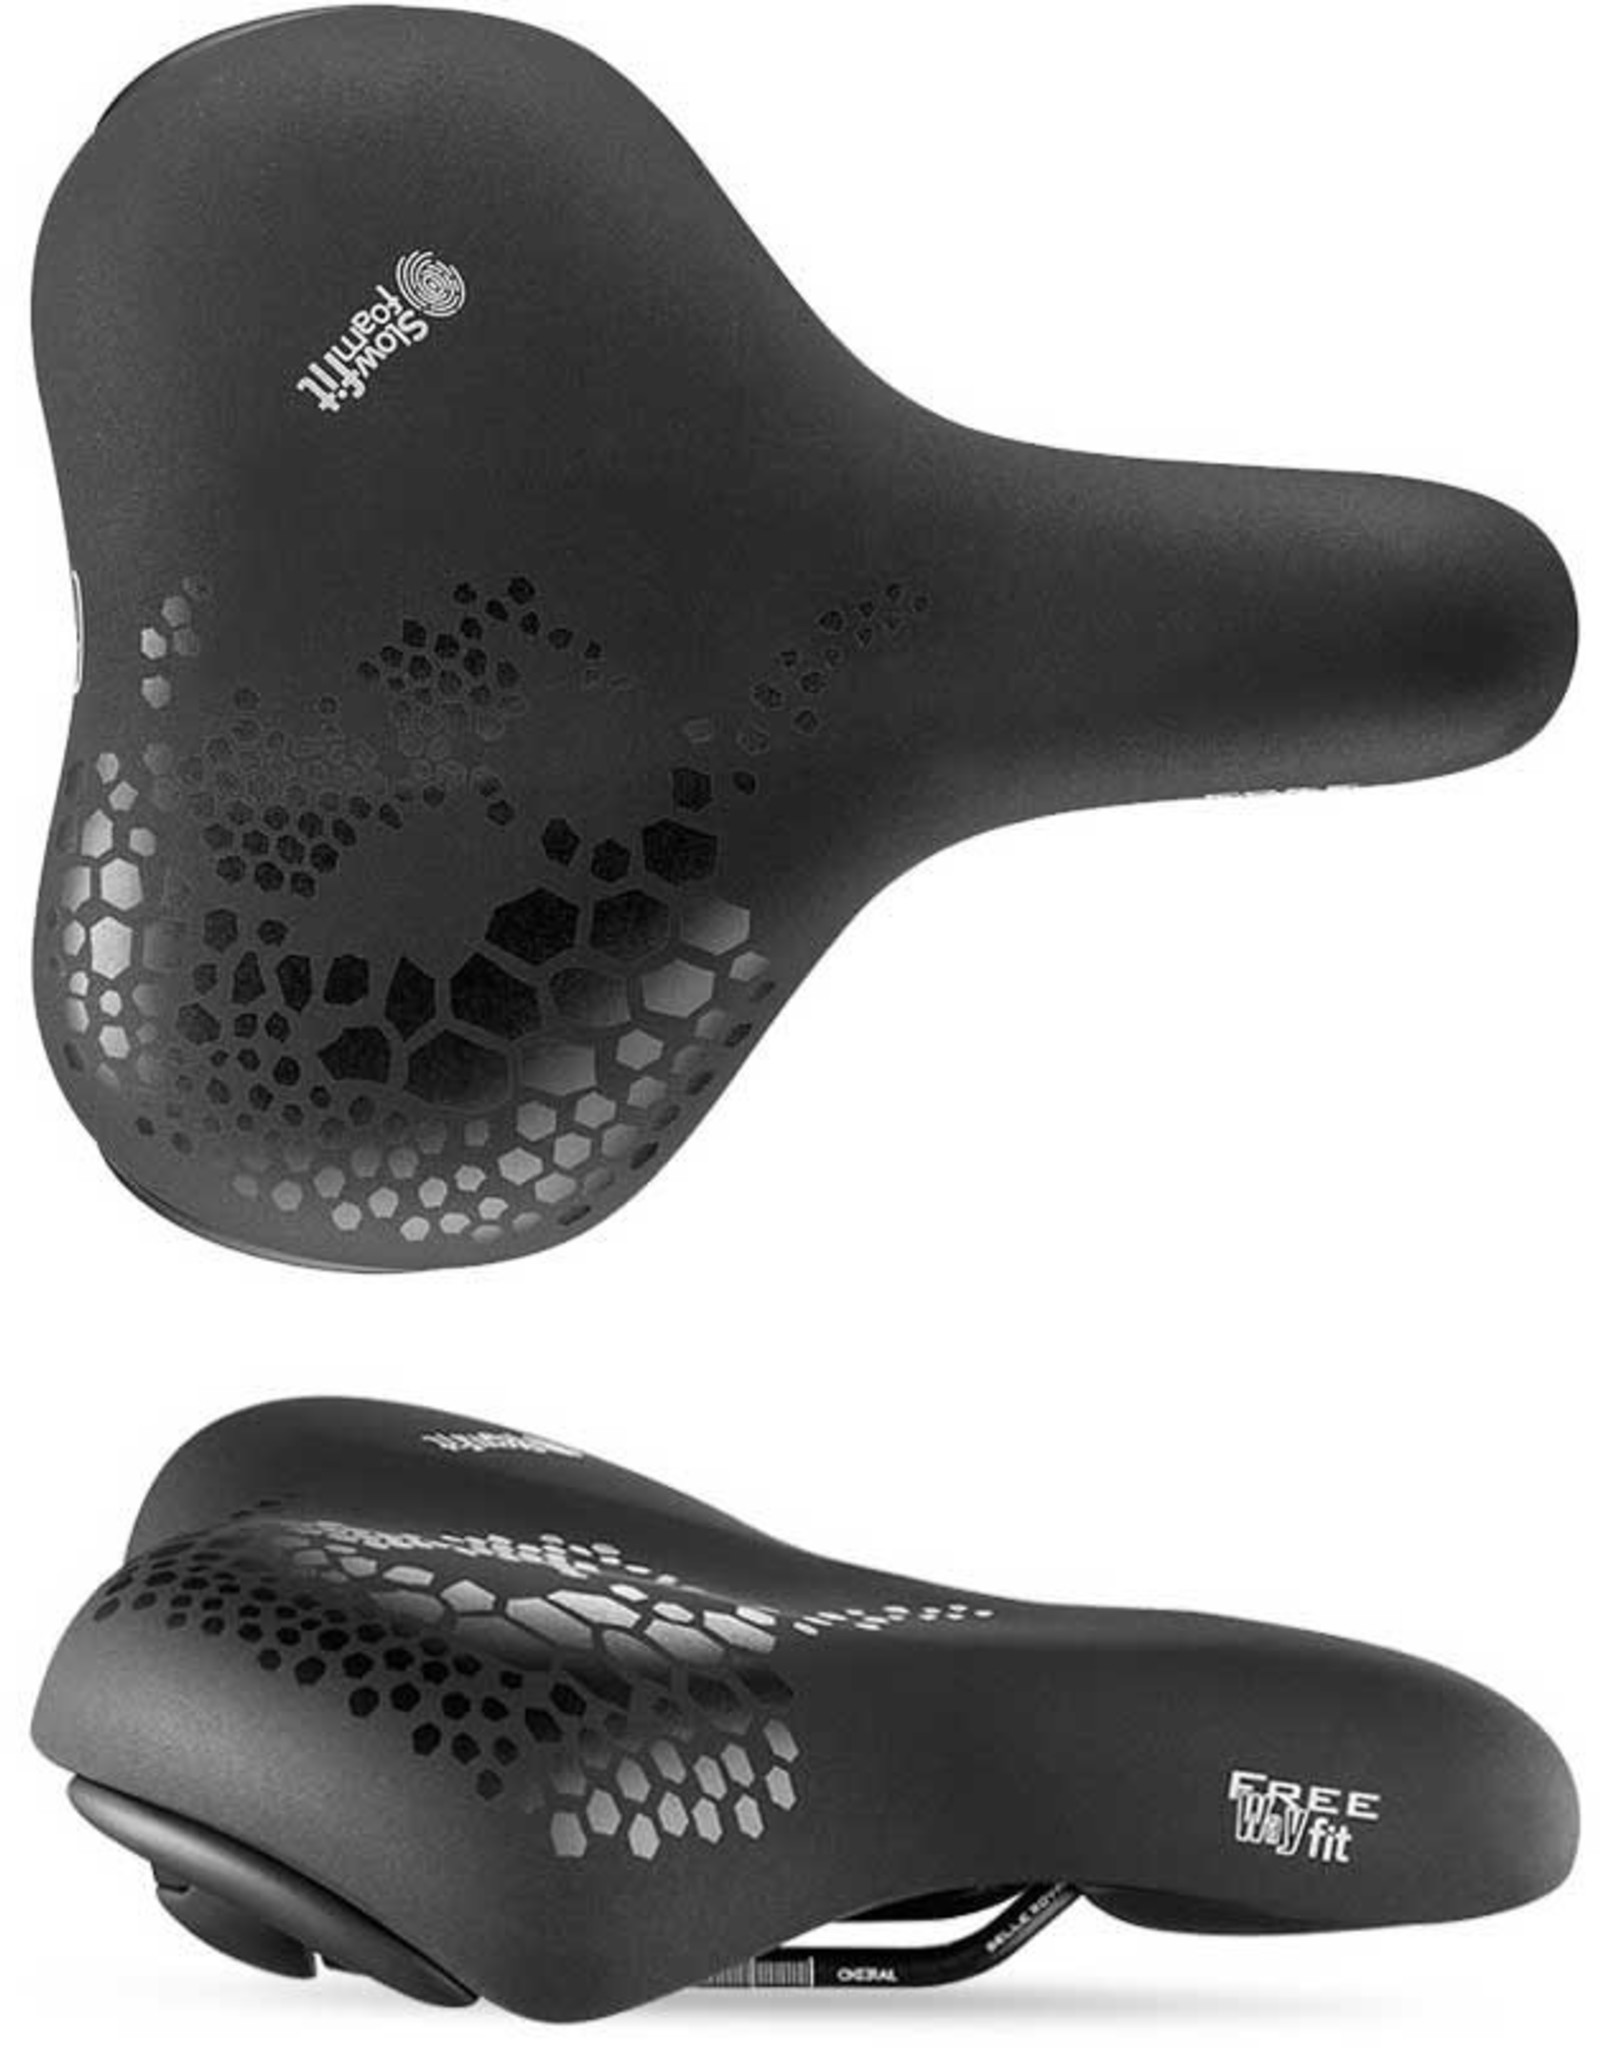 Selle Royal ComFort - Freeway Moderate - Men's - Black Soft Touch